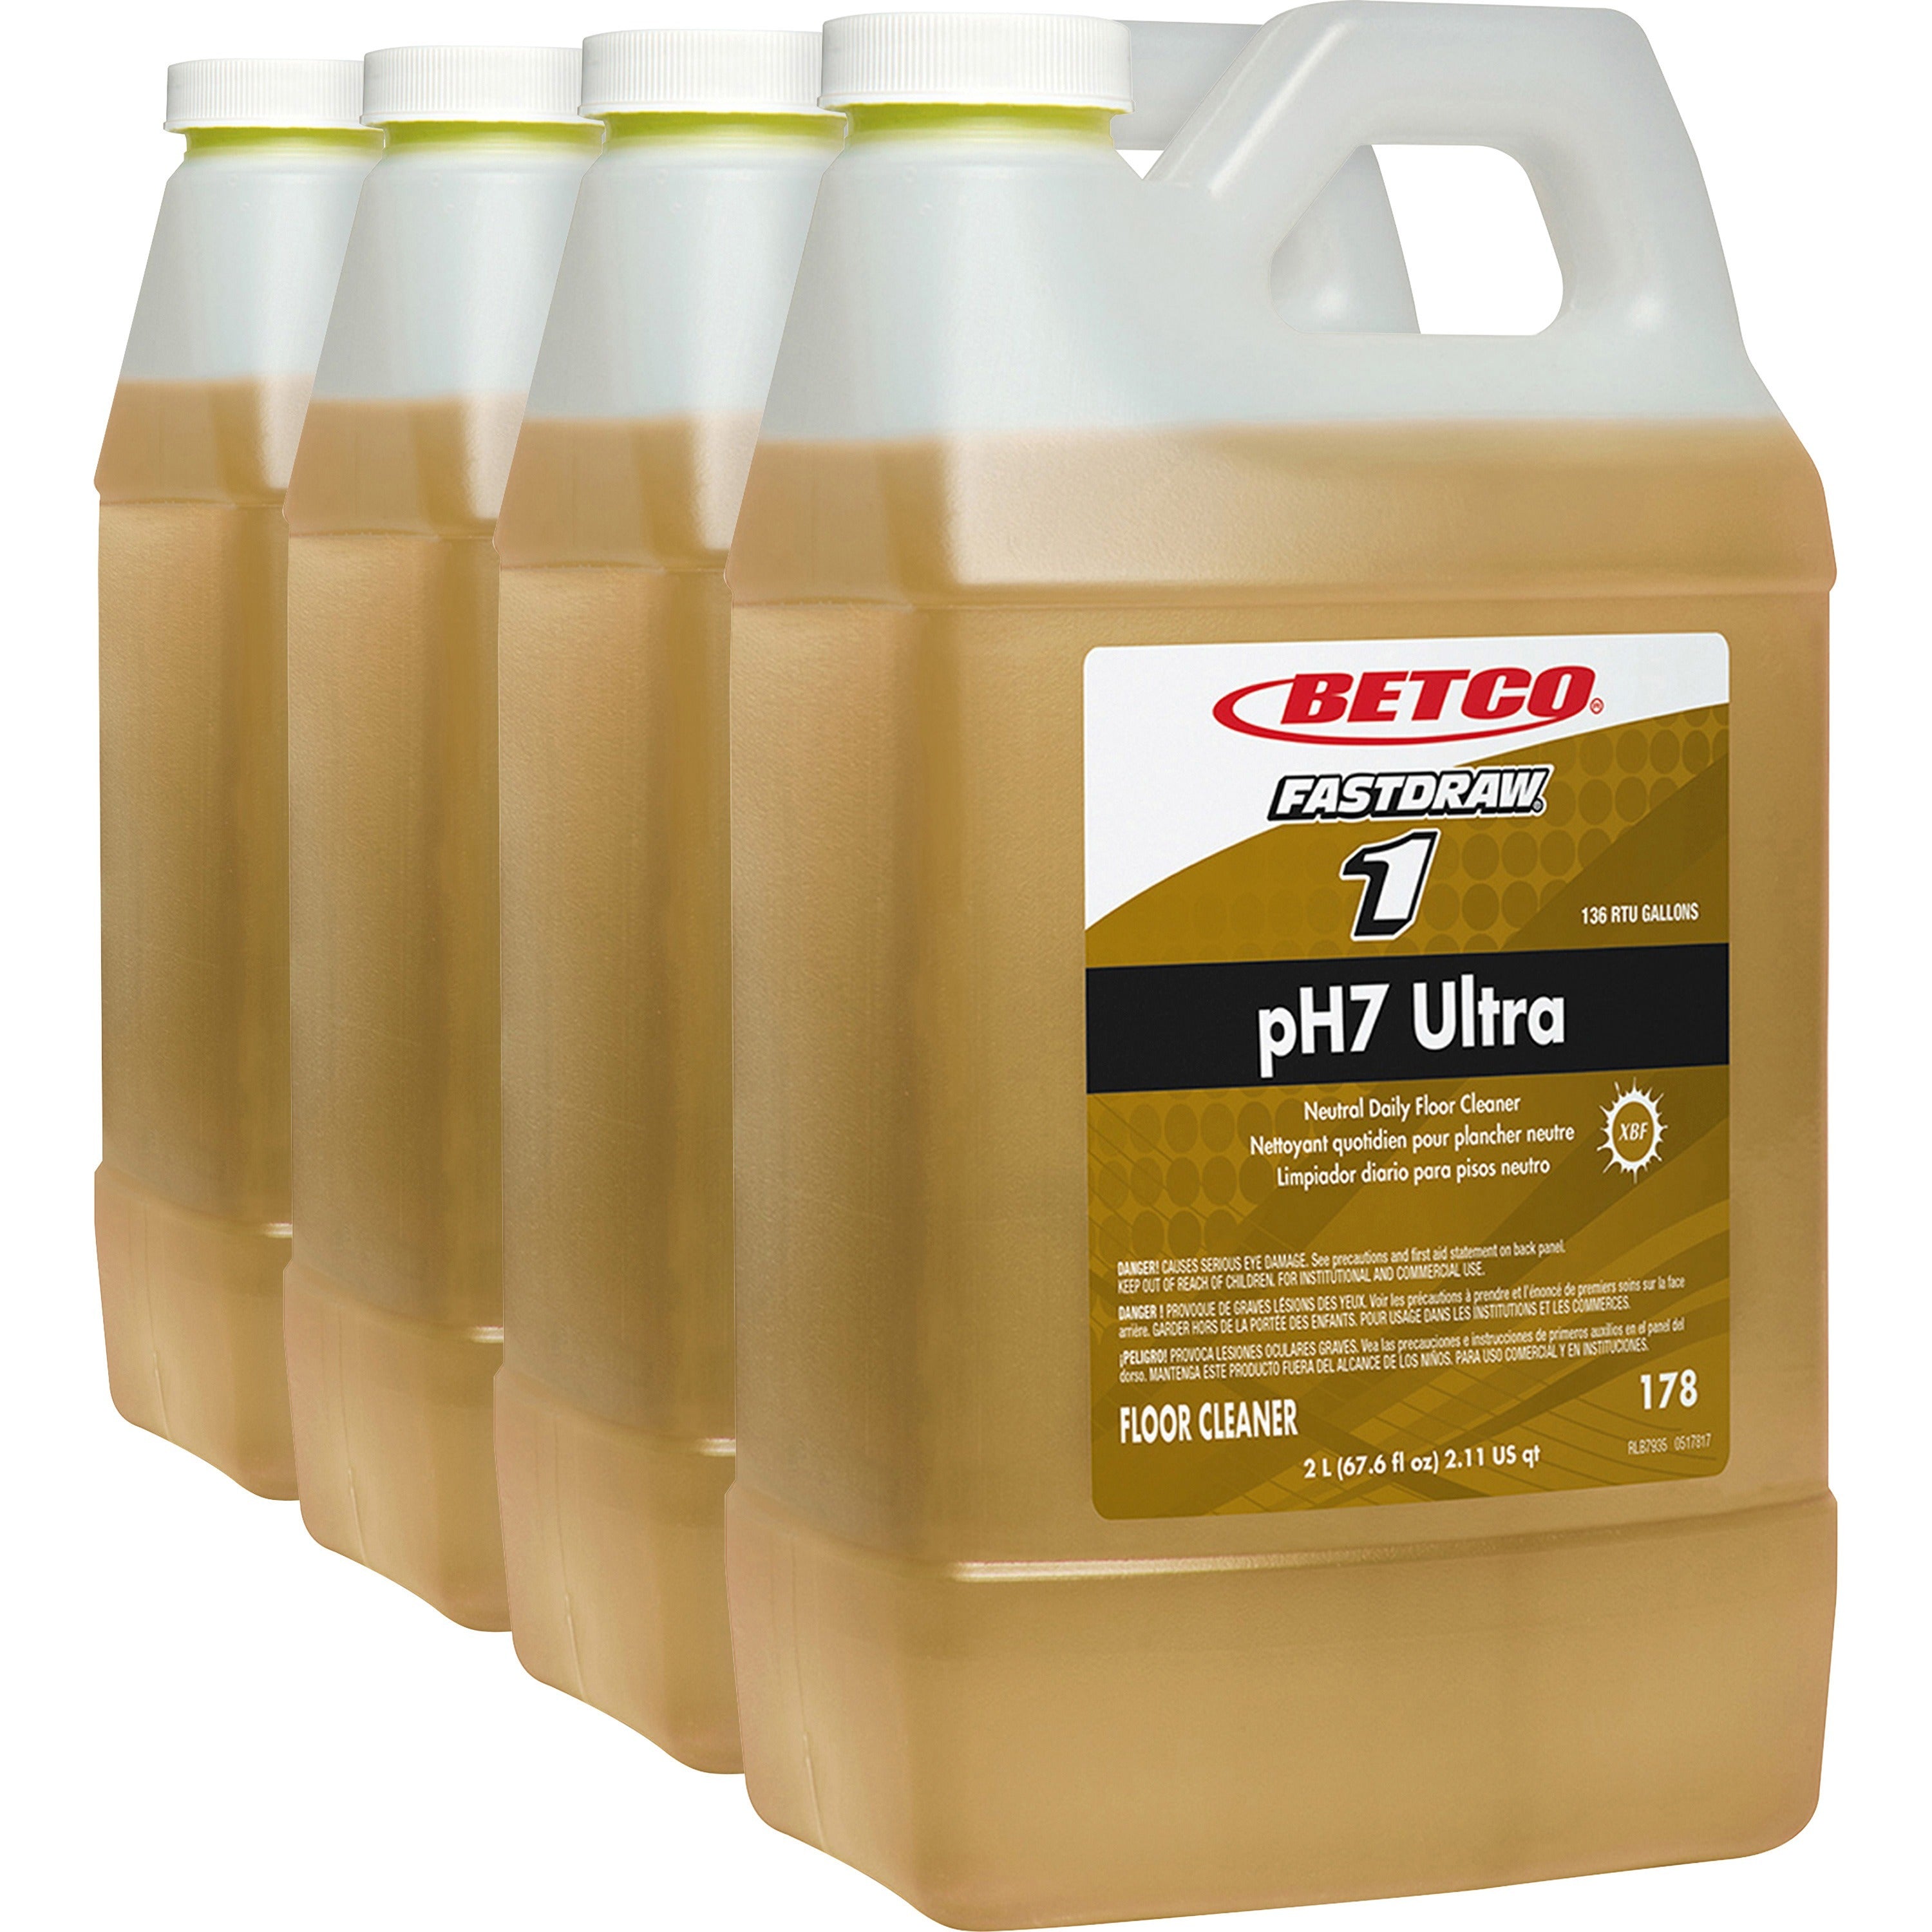 Betco pH7 Ultra Floor Cleaner - FASTDRAW 1 - Concentrate - 67.6 fl oz (2.1 quart) - Pleasant Lemon Scent - 4 / Carton - Film-free, pH Neutral, Low Foaming, Spill Proof, Chemical Resistant, Water Soluble - Yellow - 1